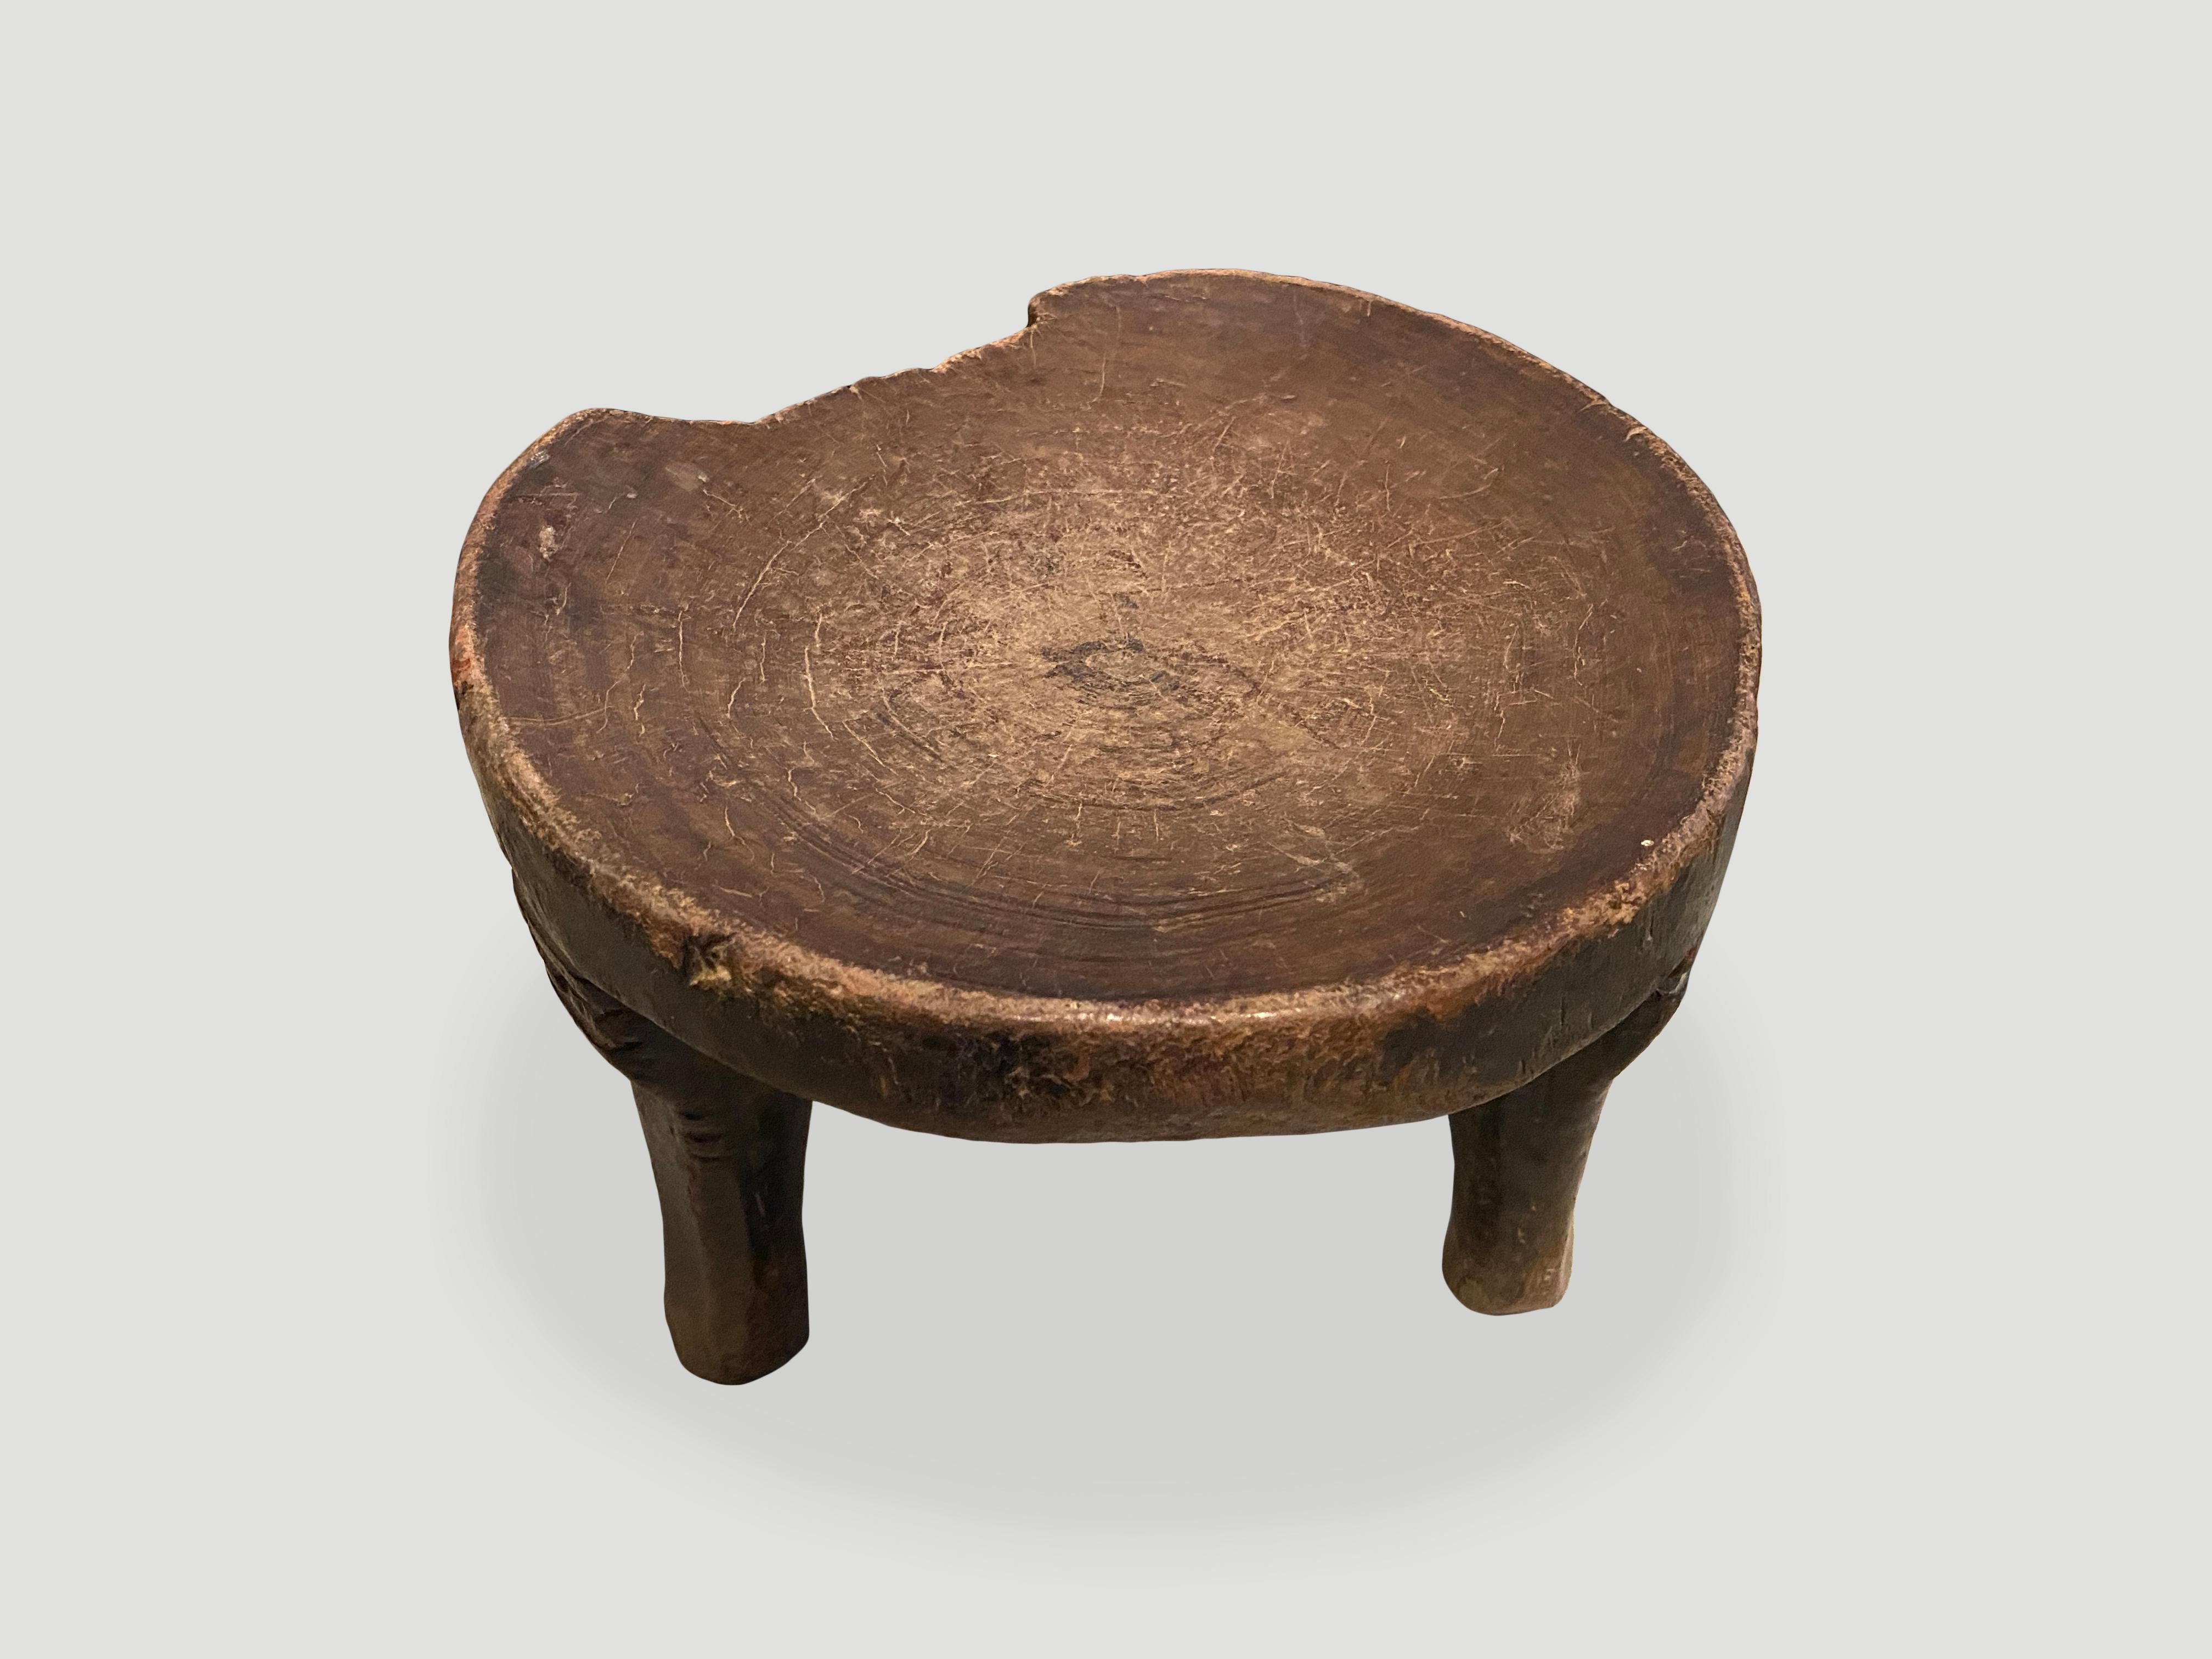 Beautiful patina on this African side table hand carved from a single block of wood. Celebrating the cracks and crevices and all the other marks that time and loving use have left behind. We only source the best. Circa 1900.

This side table was